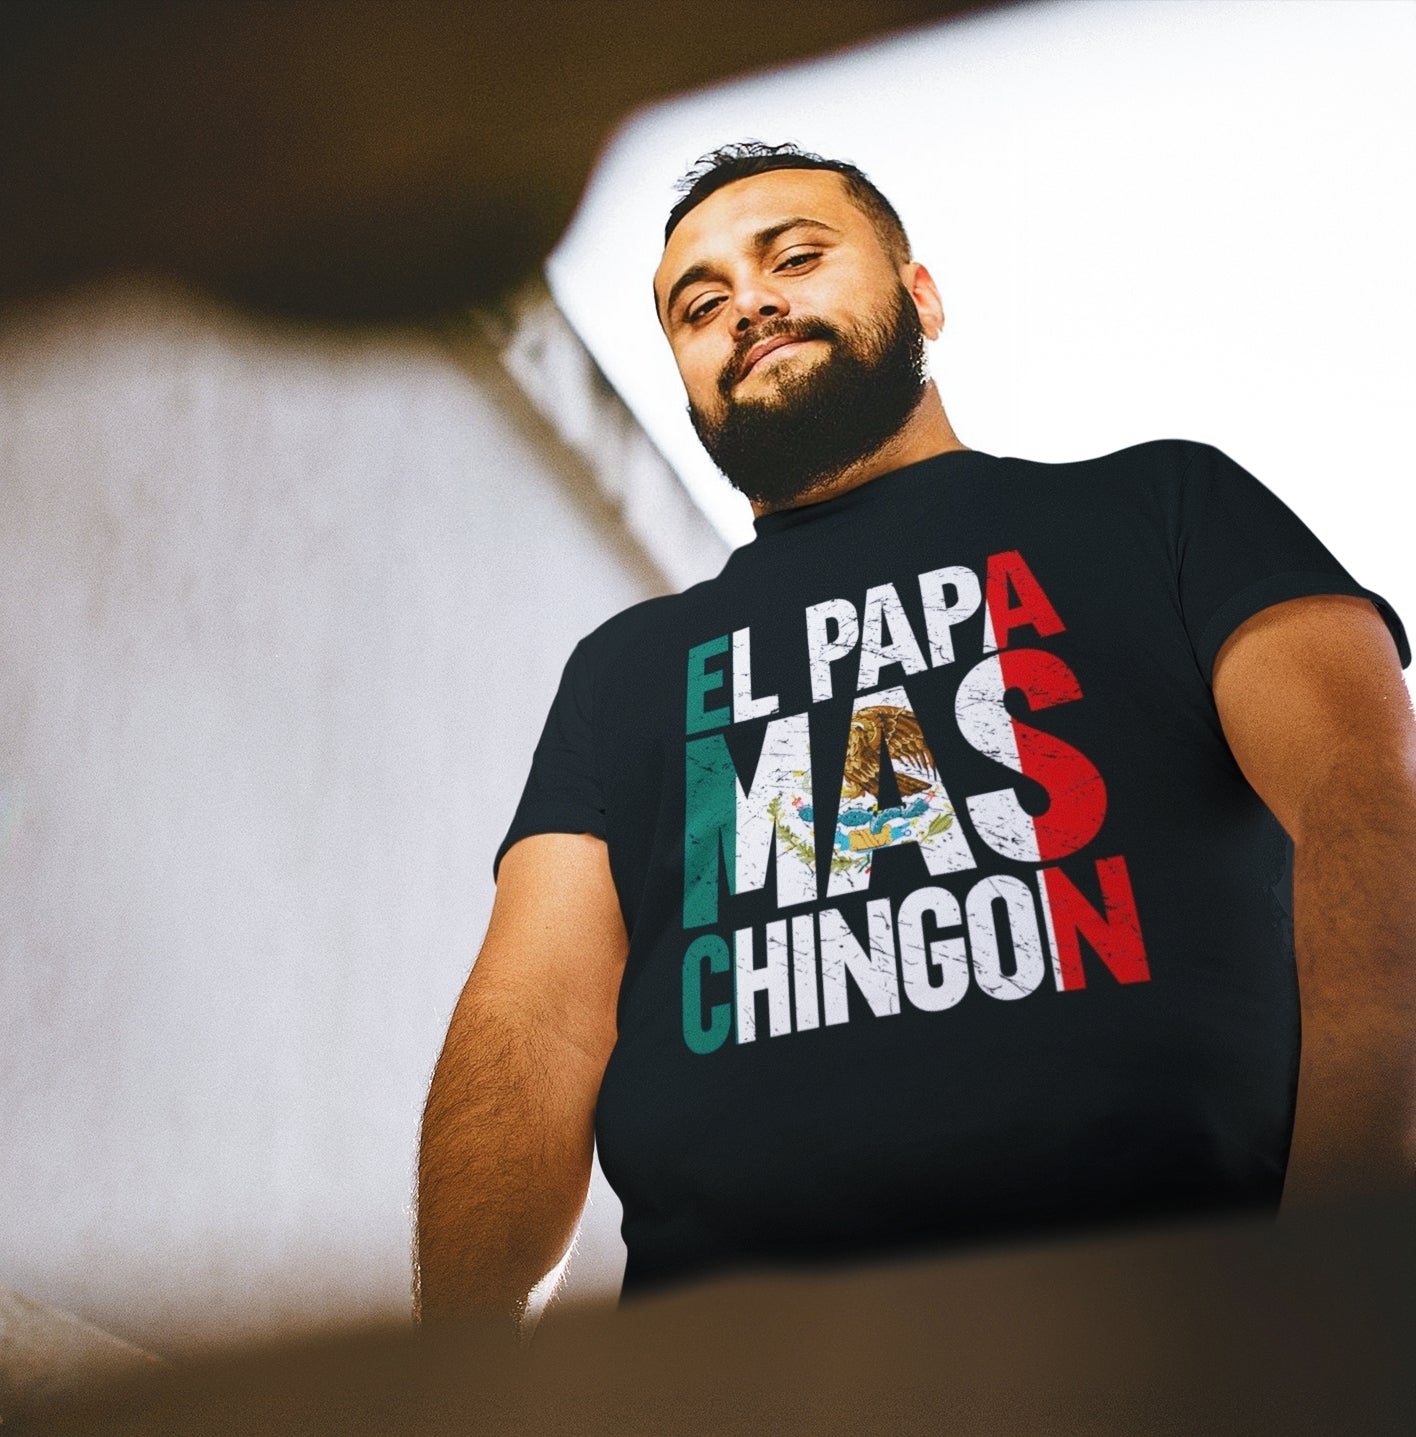 mexican man wearing an empowering black t-shirt for men with a graphic of the Mexican flag and the words "El Papa Mas Chingon